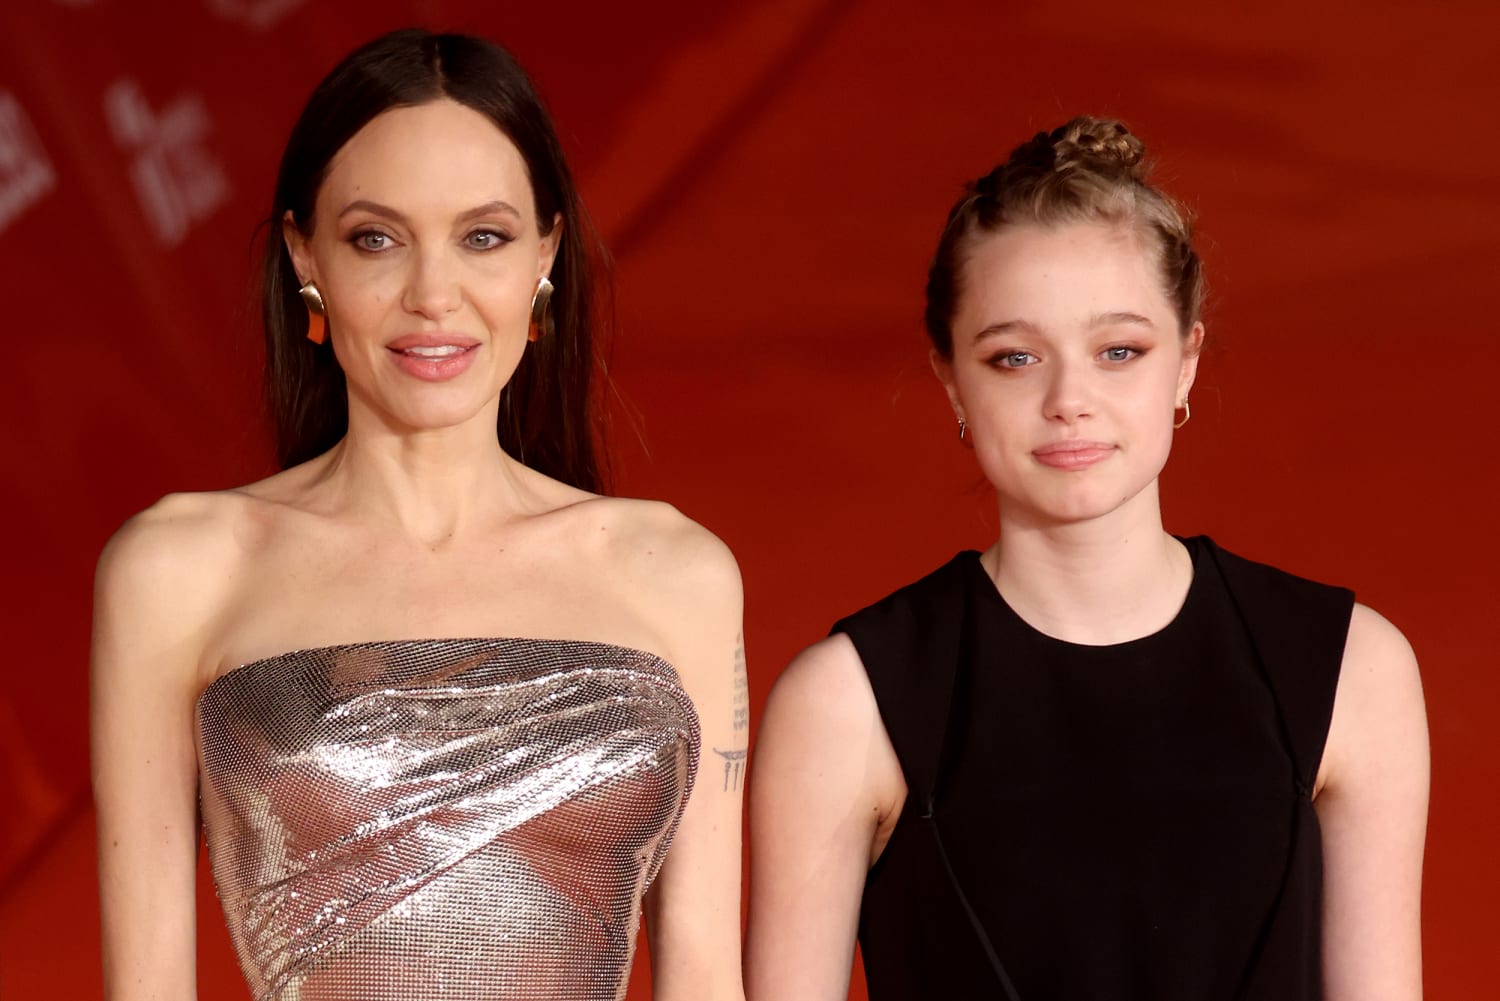 Angelina Jolie on stepping away from film, doesn't feel like herself